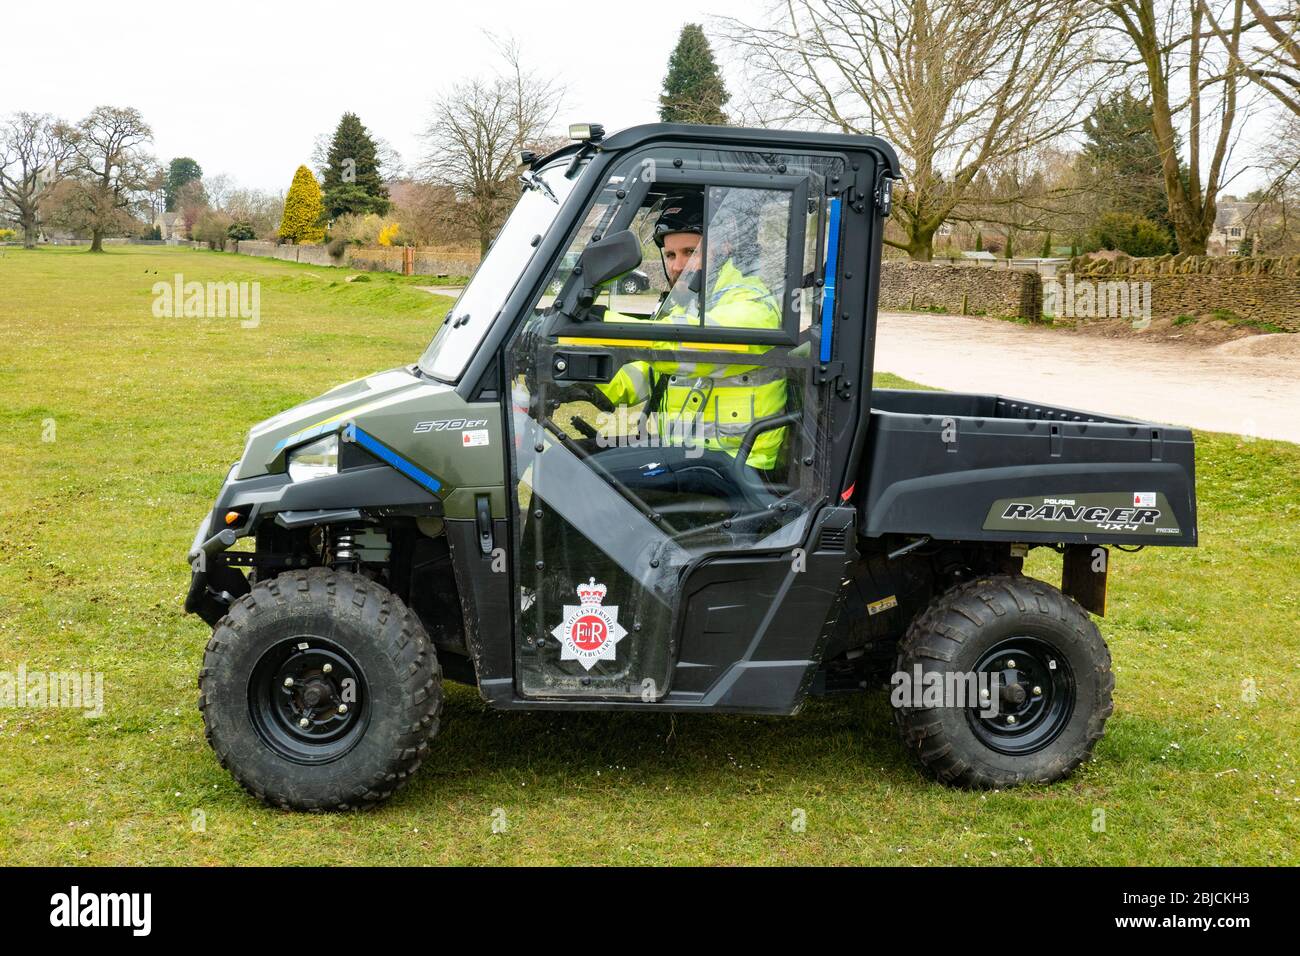 A police officer in a new all terrain vehicle during lockdown in the UK Stock Photo